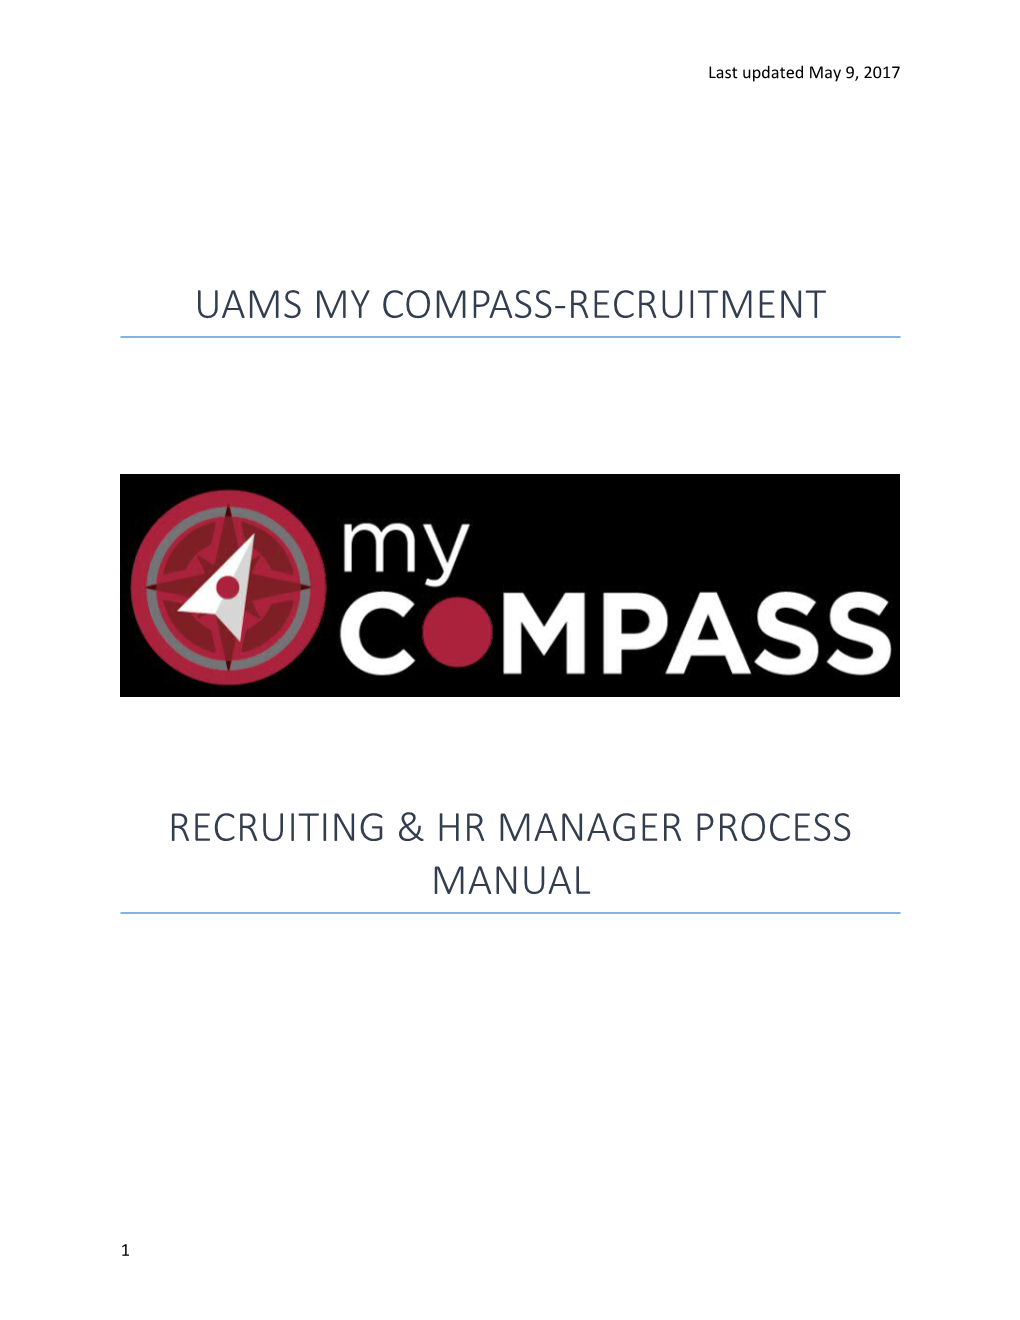 Recruiting & Hr Manager Process Manual